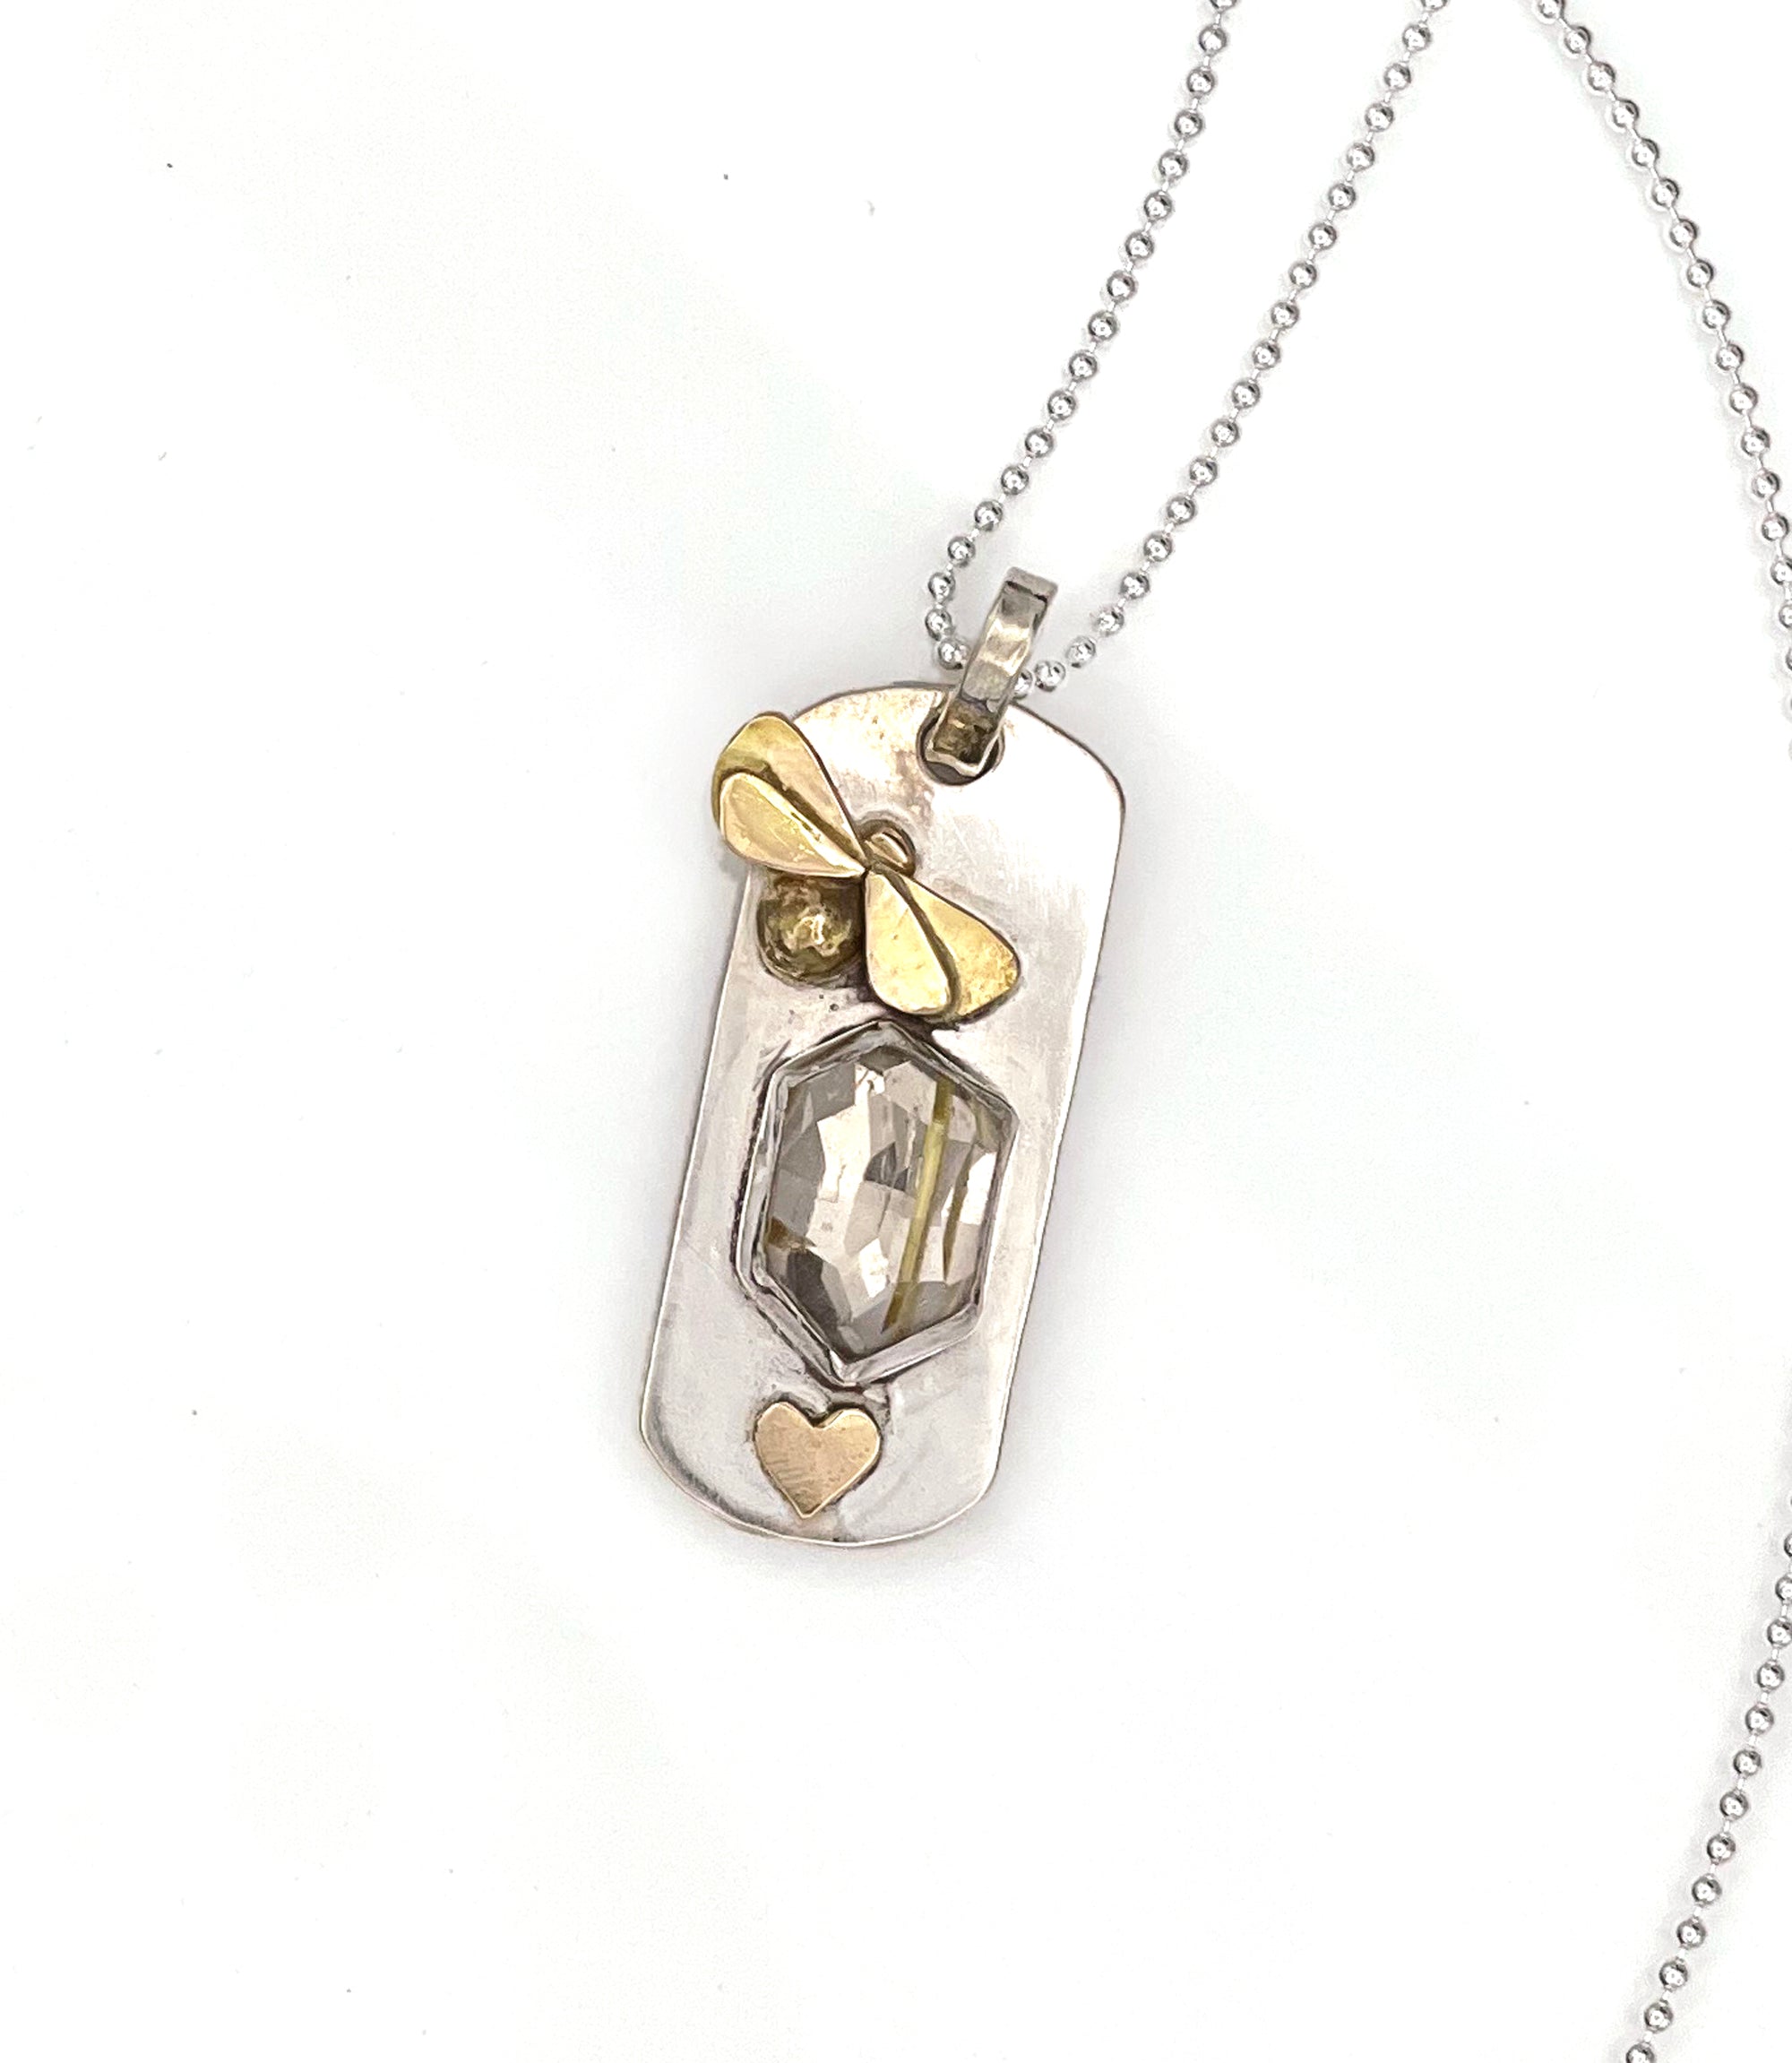 Honeybee Dog Tag Necklace, Rutilated Quartz Dog Tag Necklace, One of a Kind